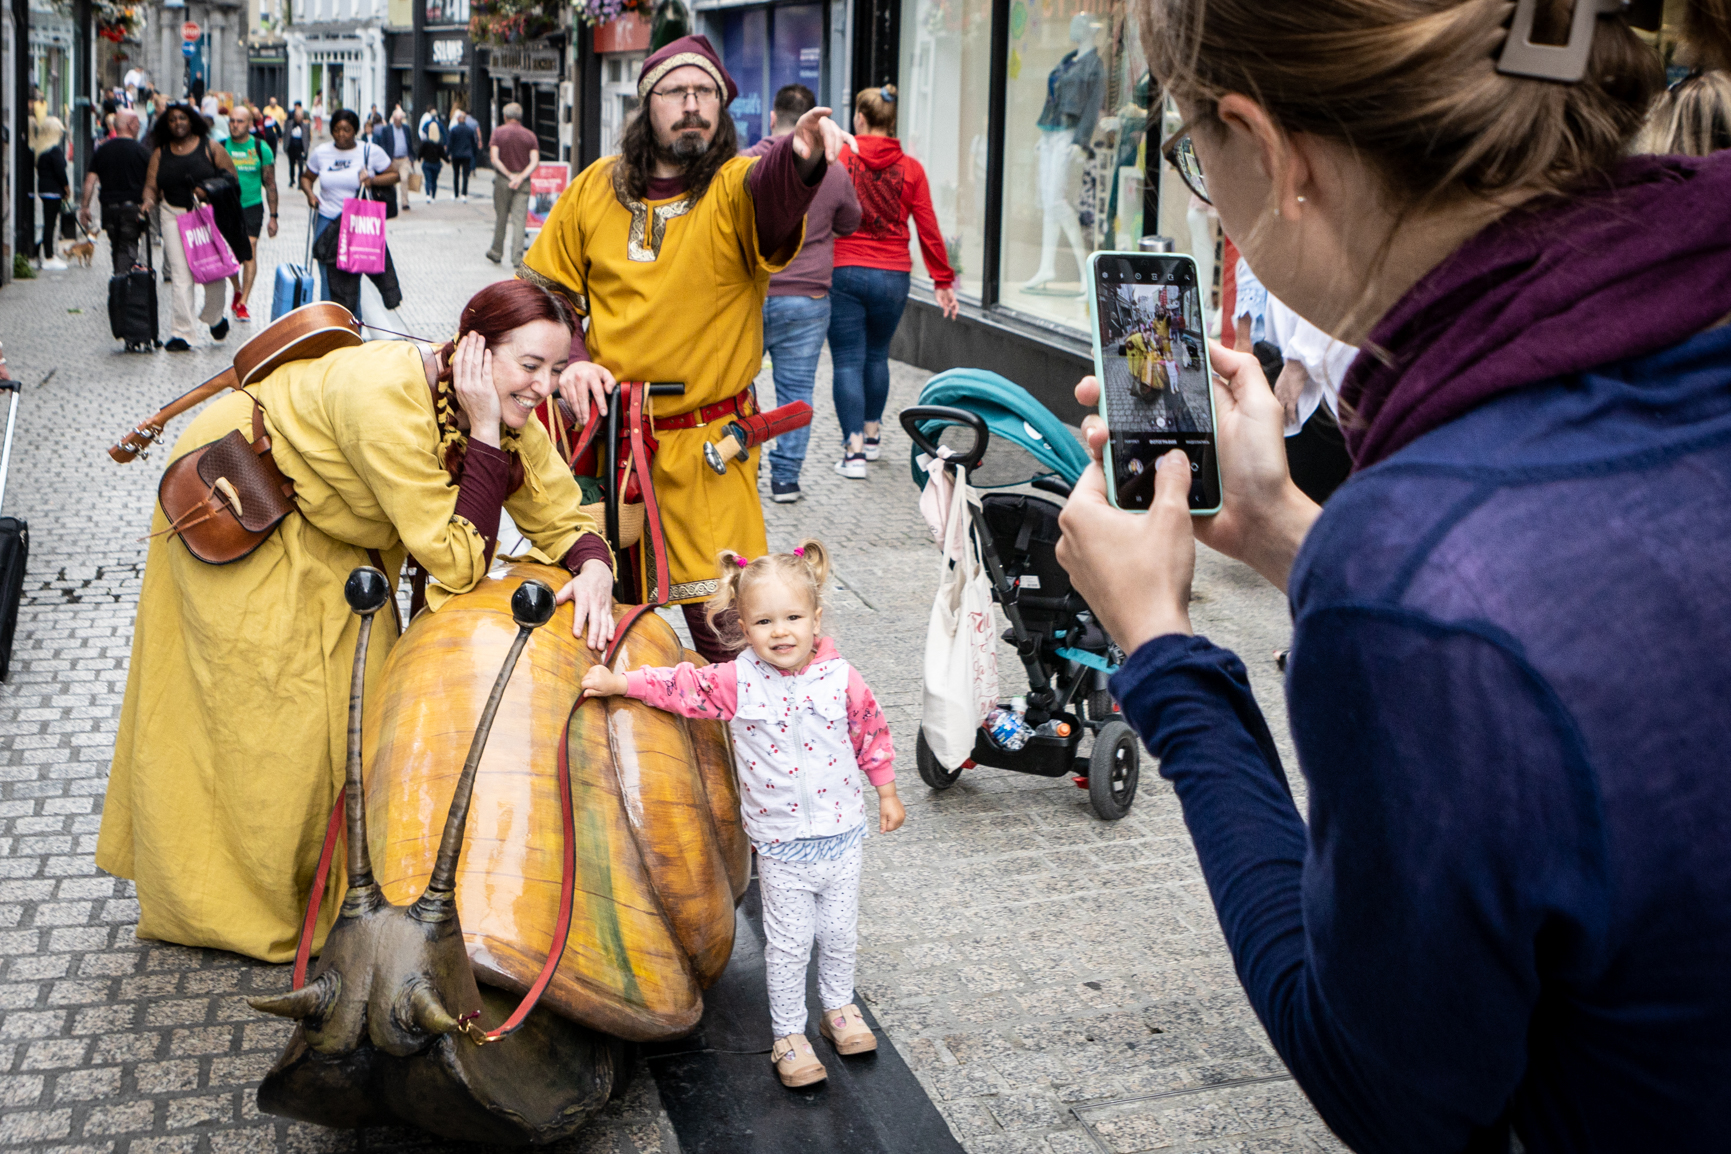 In a paved town street, a small child is having her picture taken with 2 people in mustard coloured costumes with a giant yellow snail.